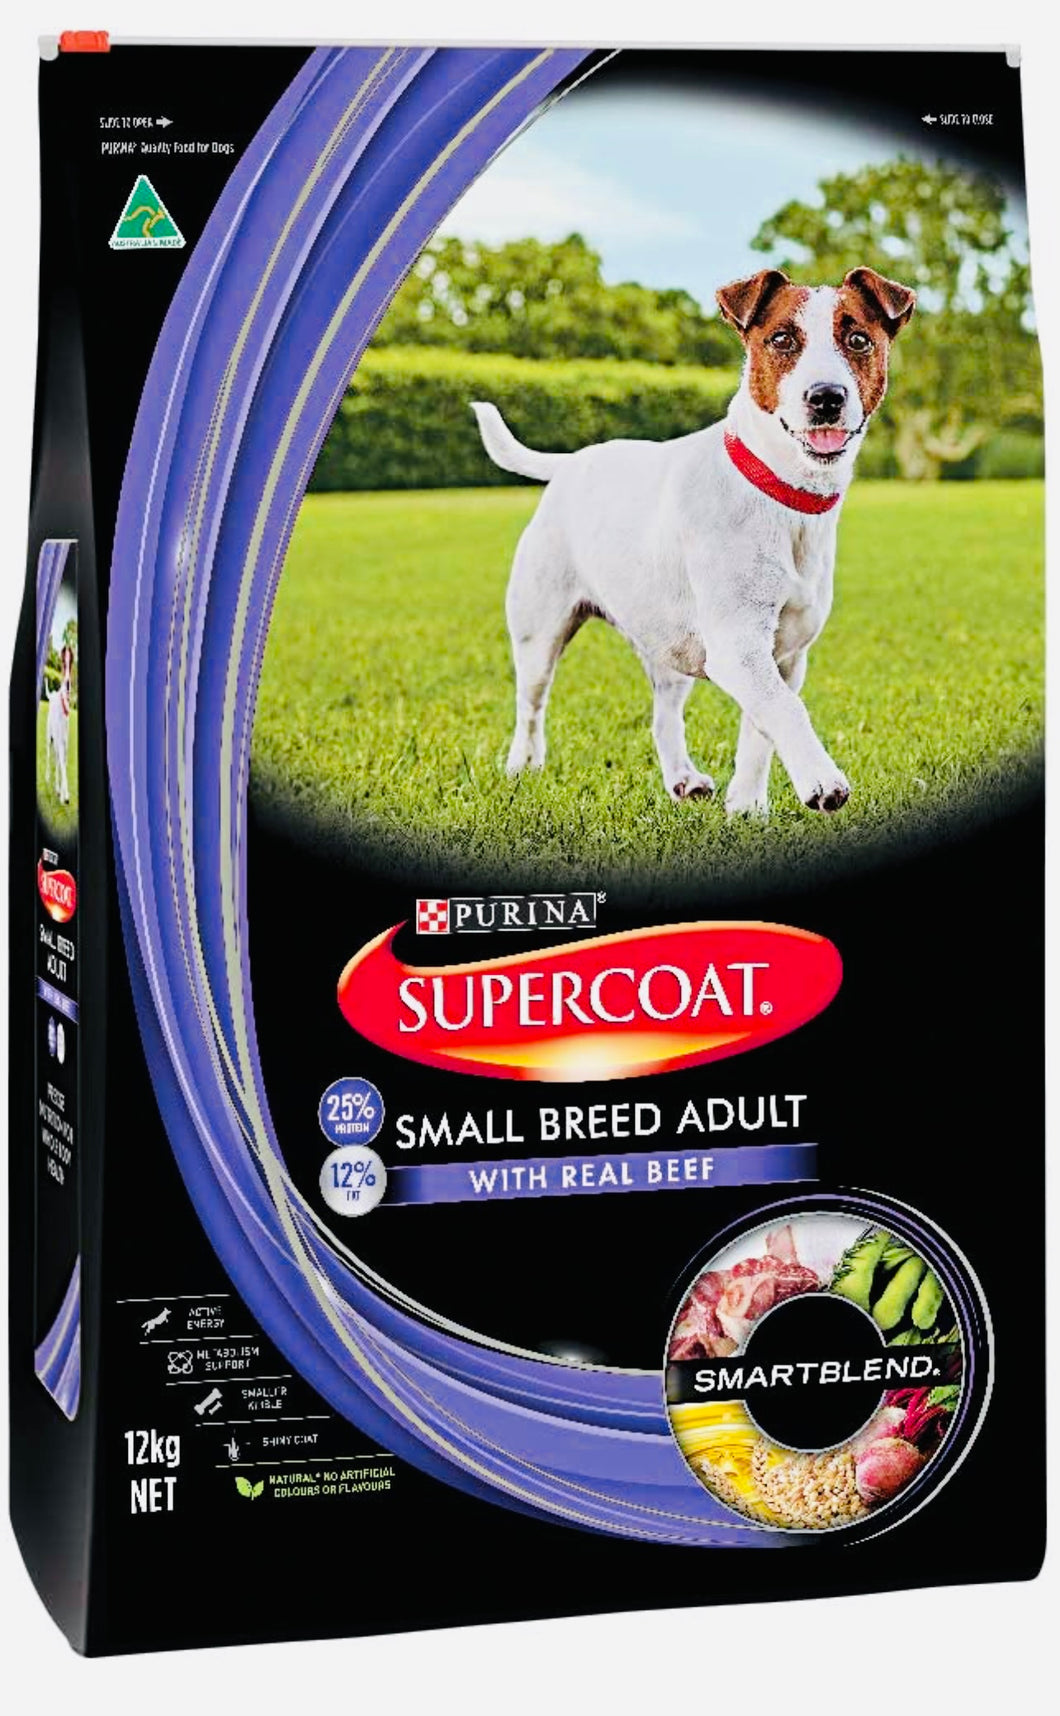 Supercoat Small breed Beef dog food 12KG